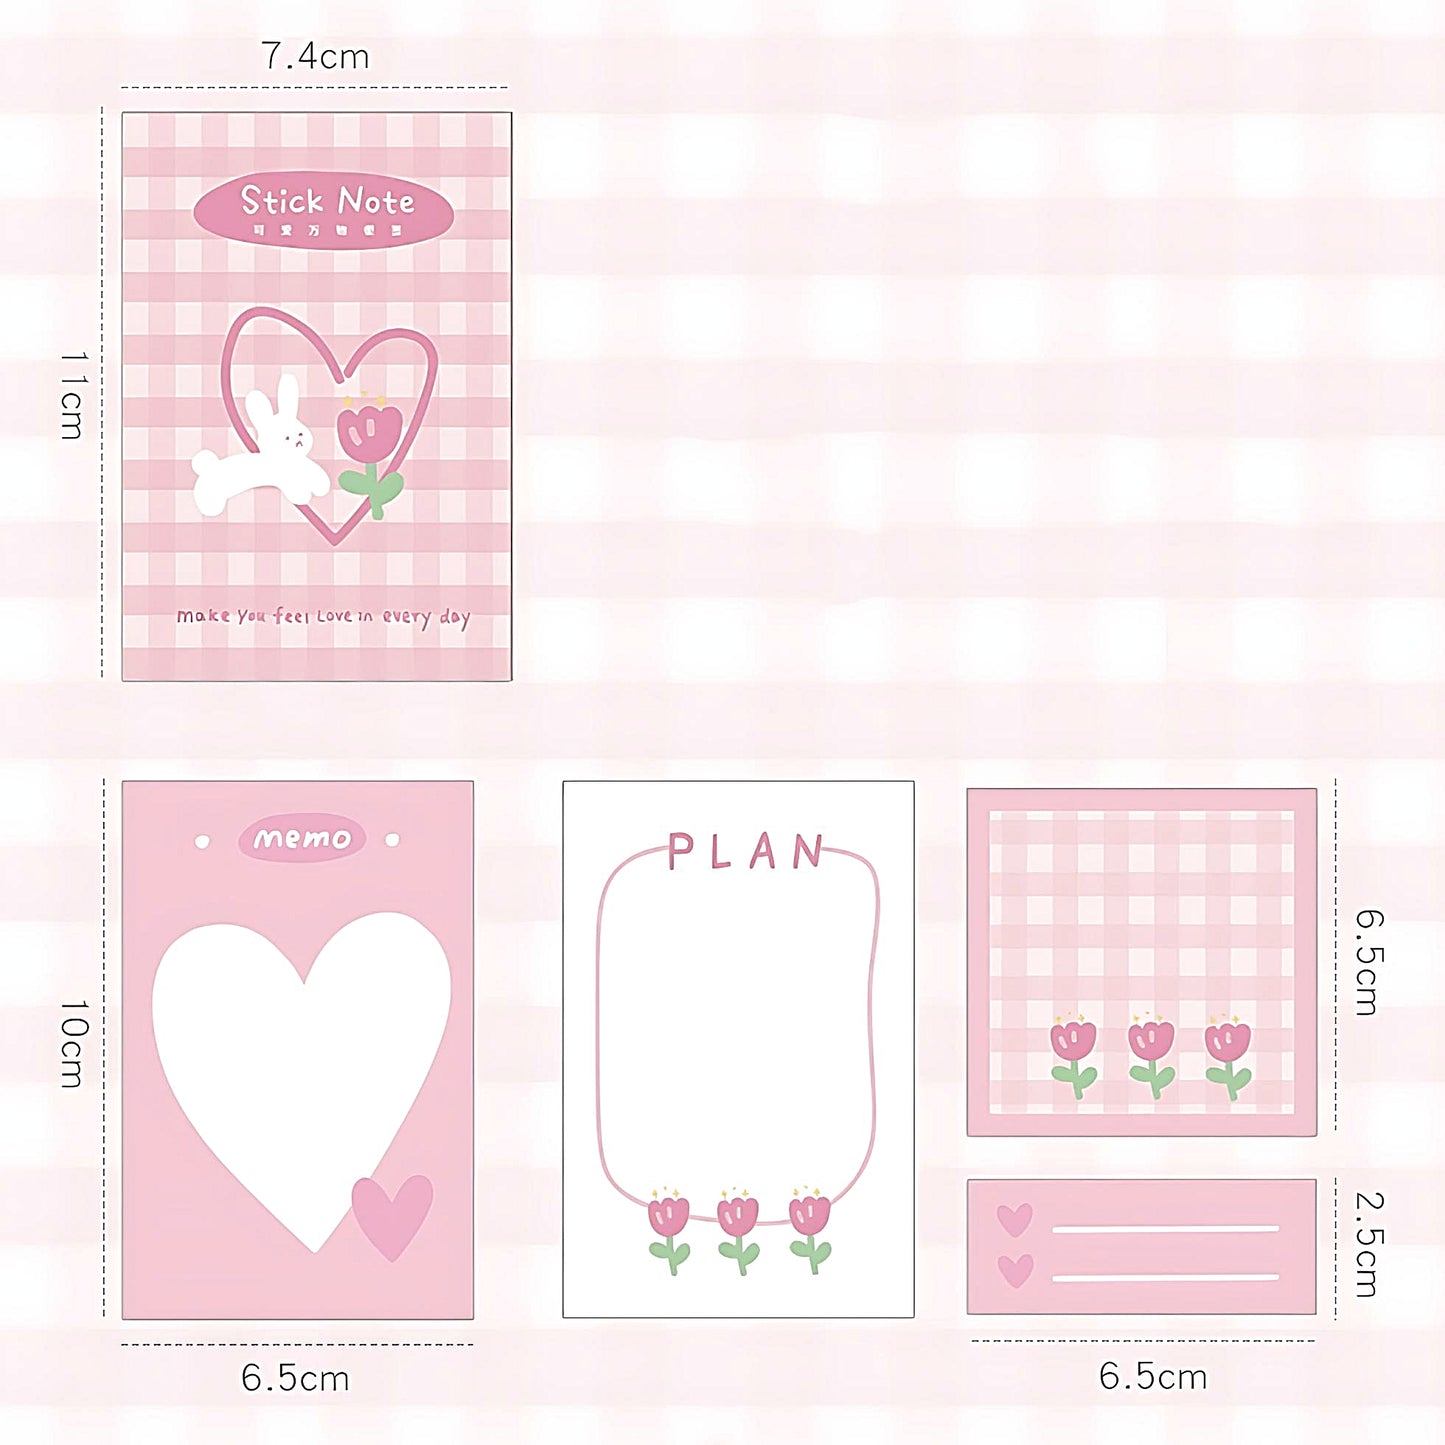 a cute sticky note set in pink color 